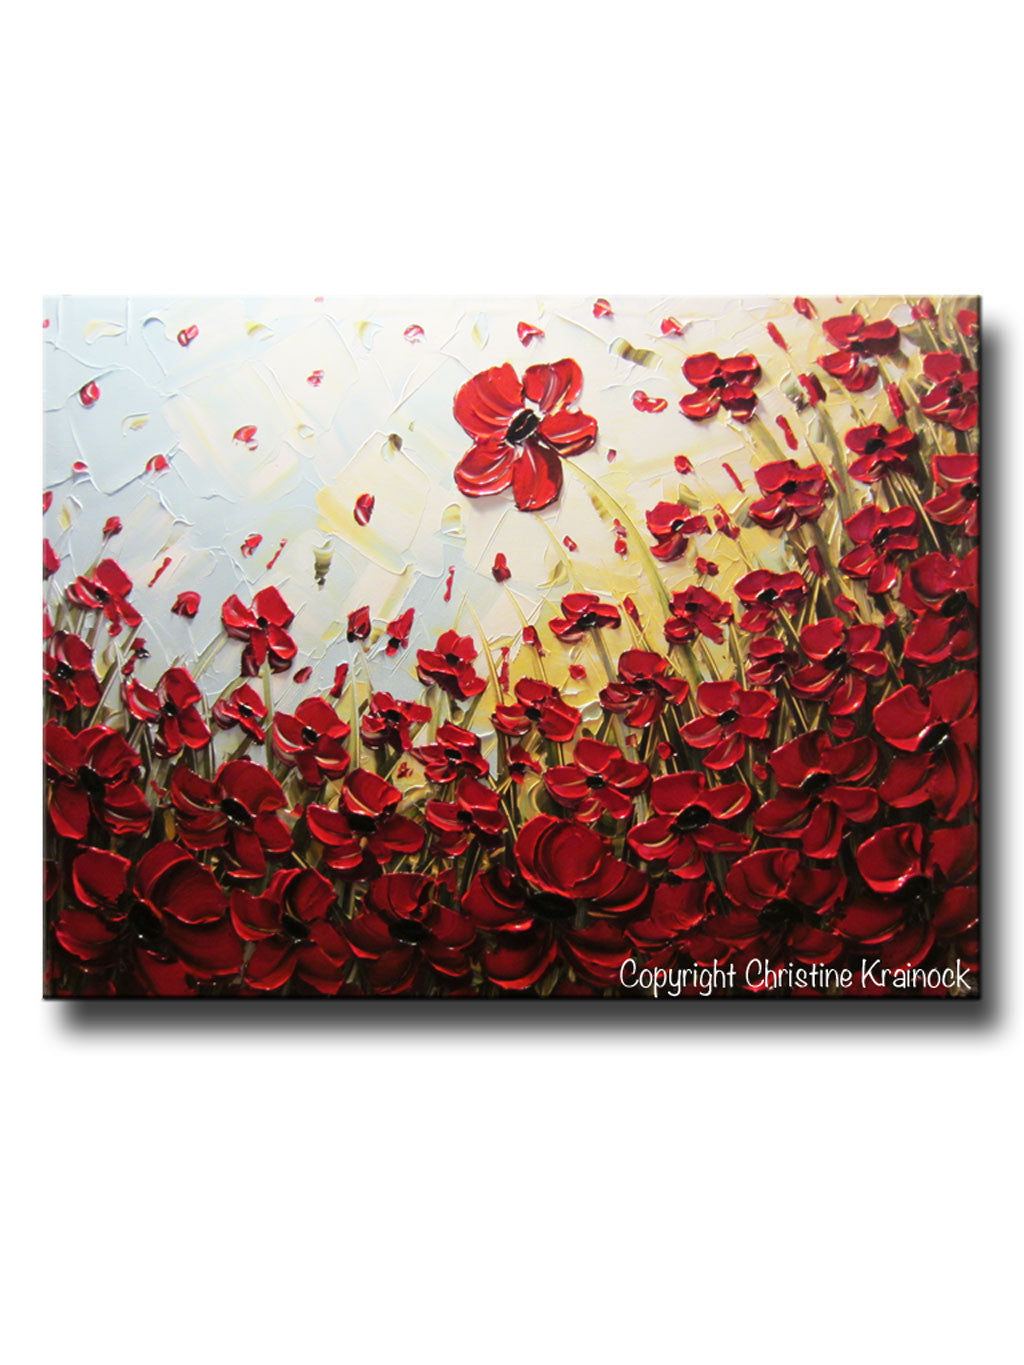 Brown Bag Filled With Red Poppies Canv - Canvas Art